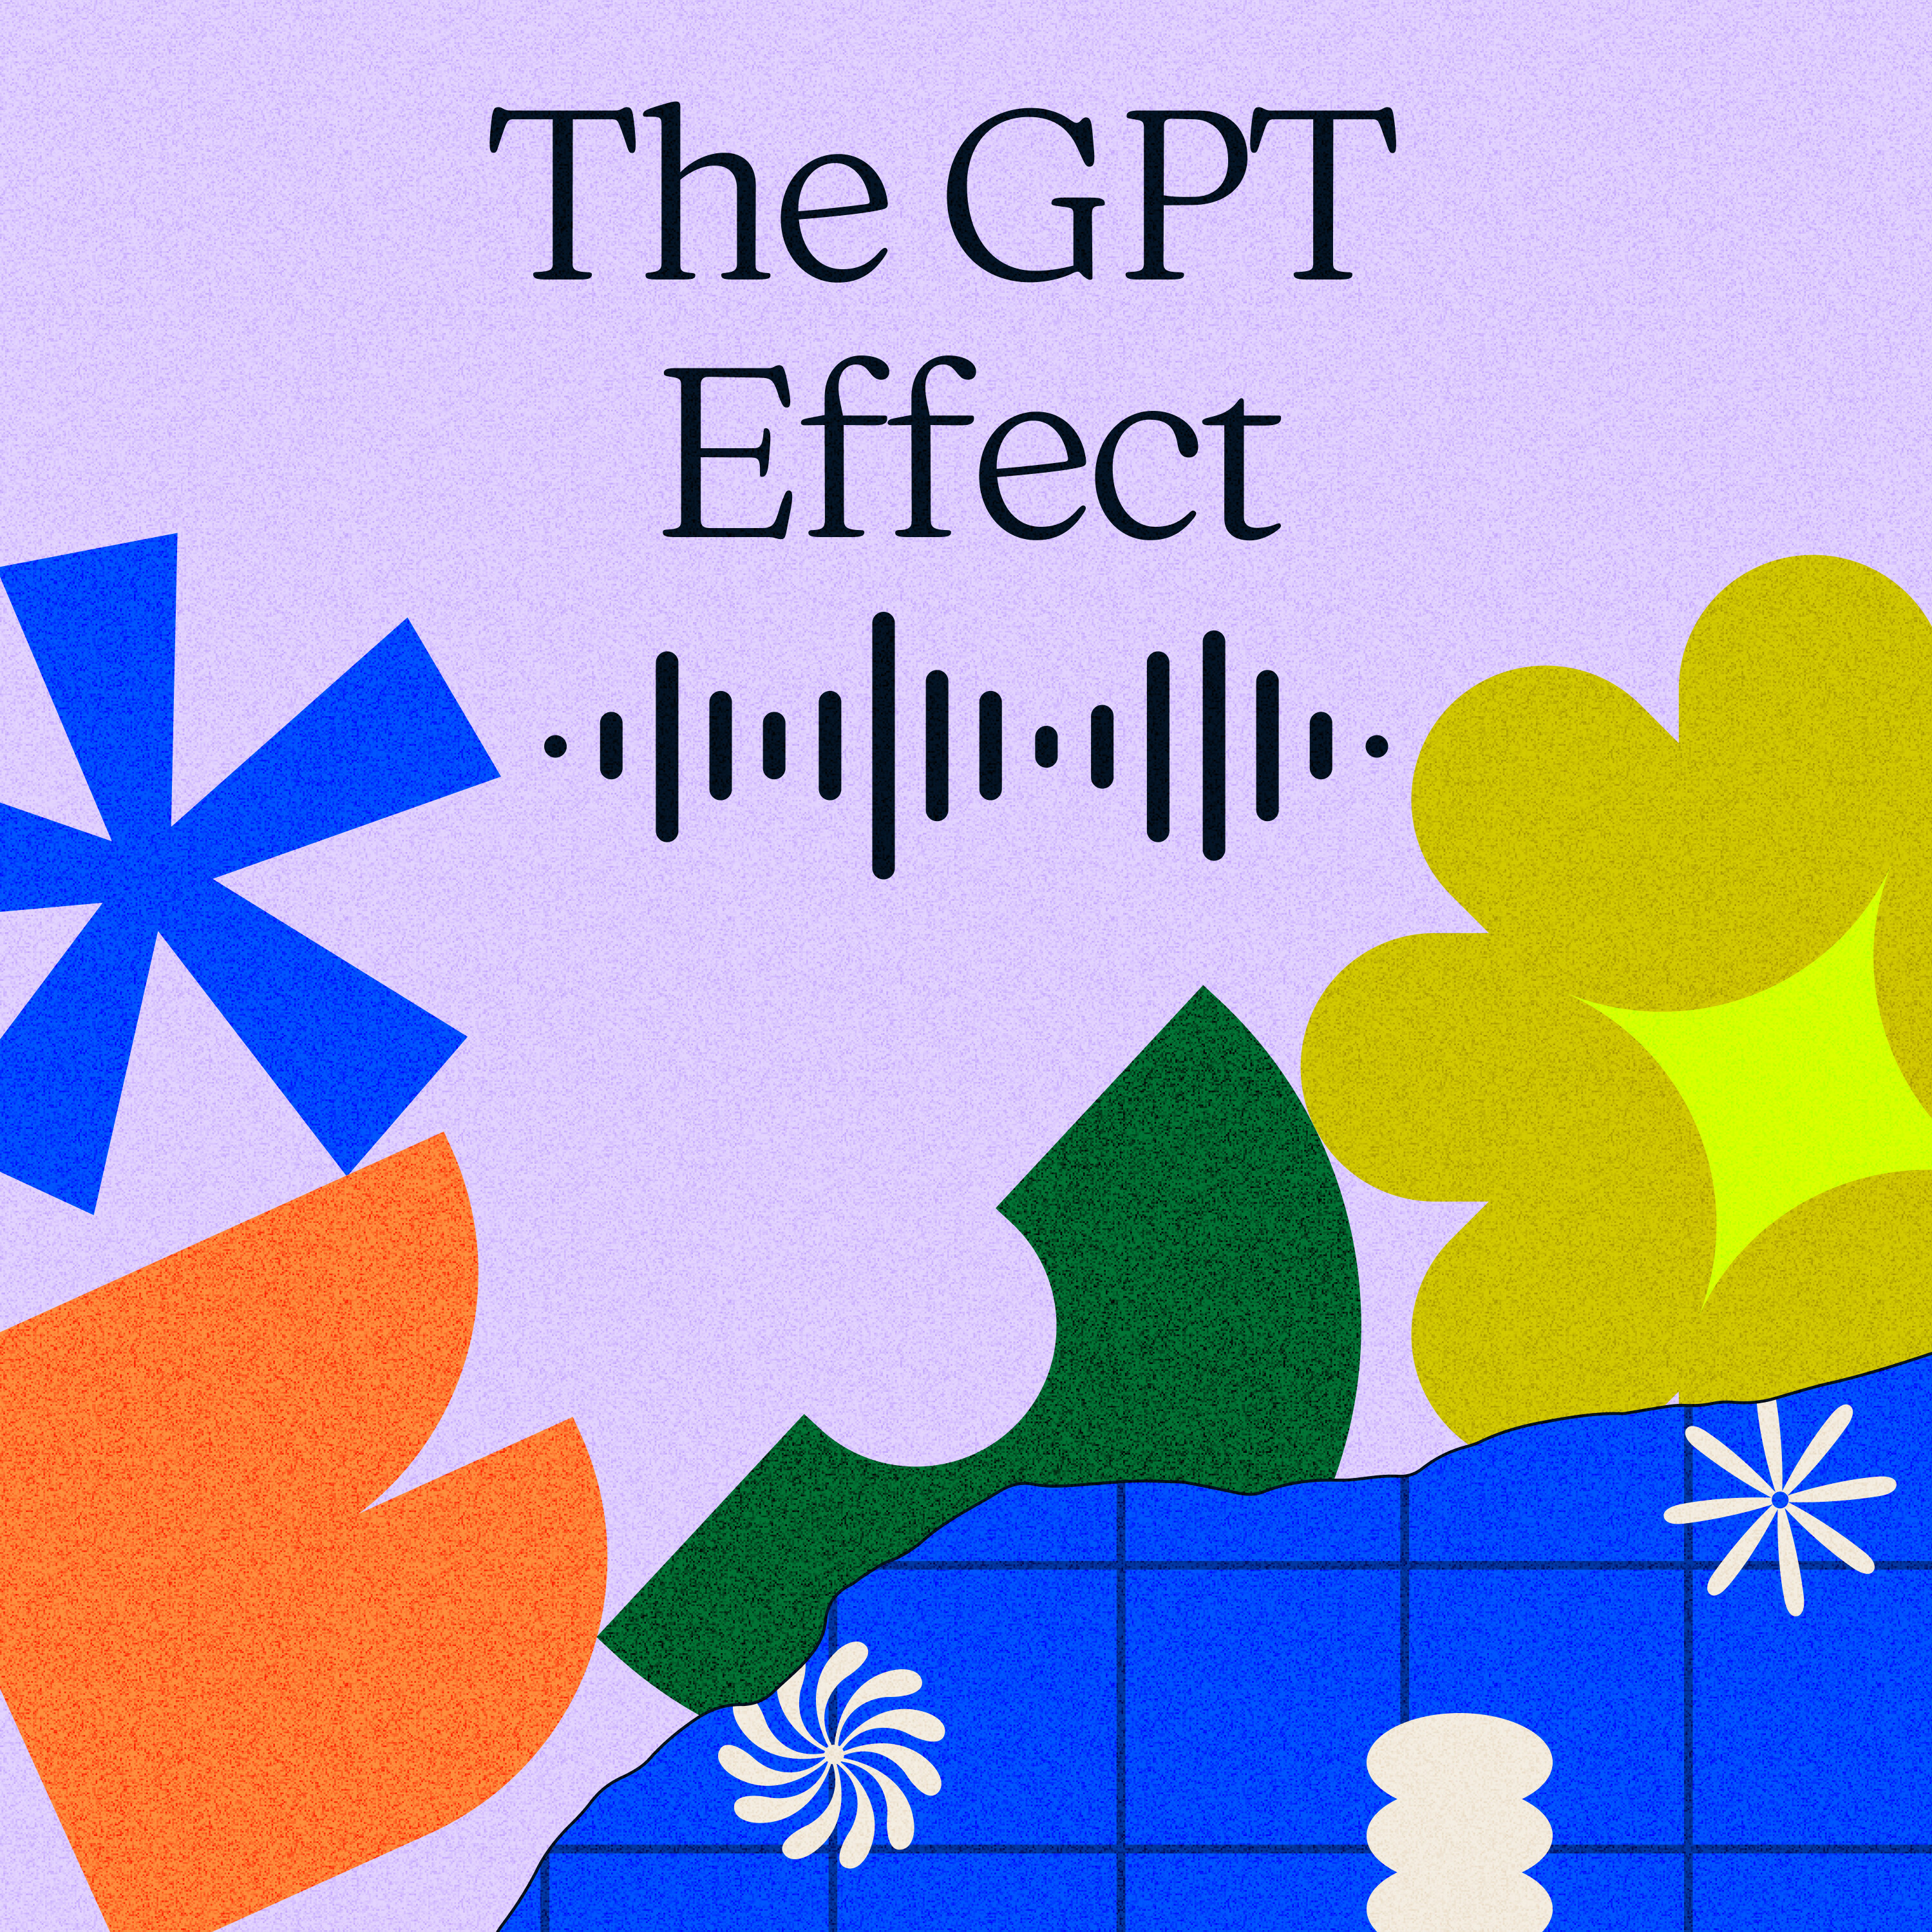 The GPT effect: A new era of customer service